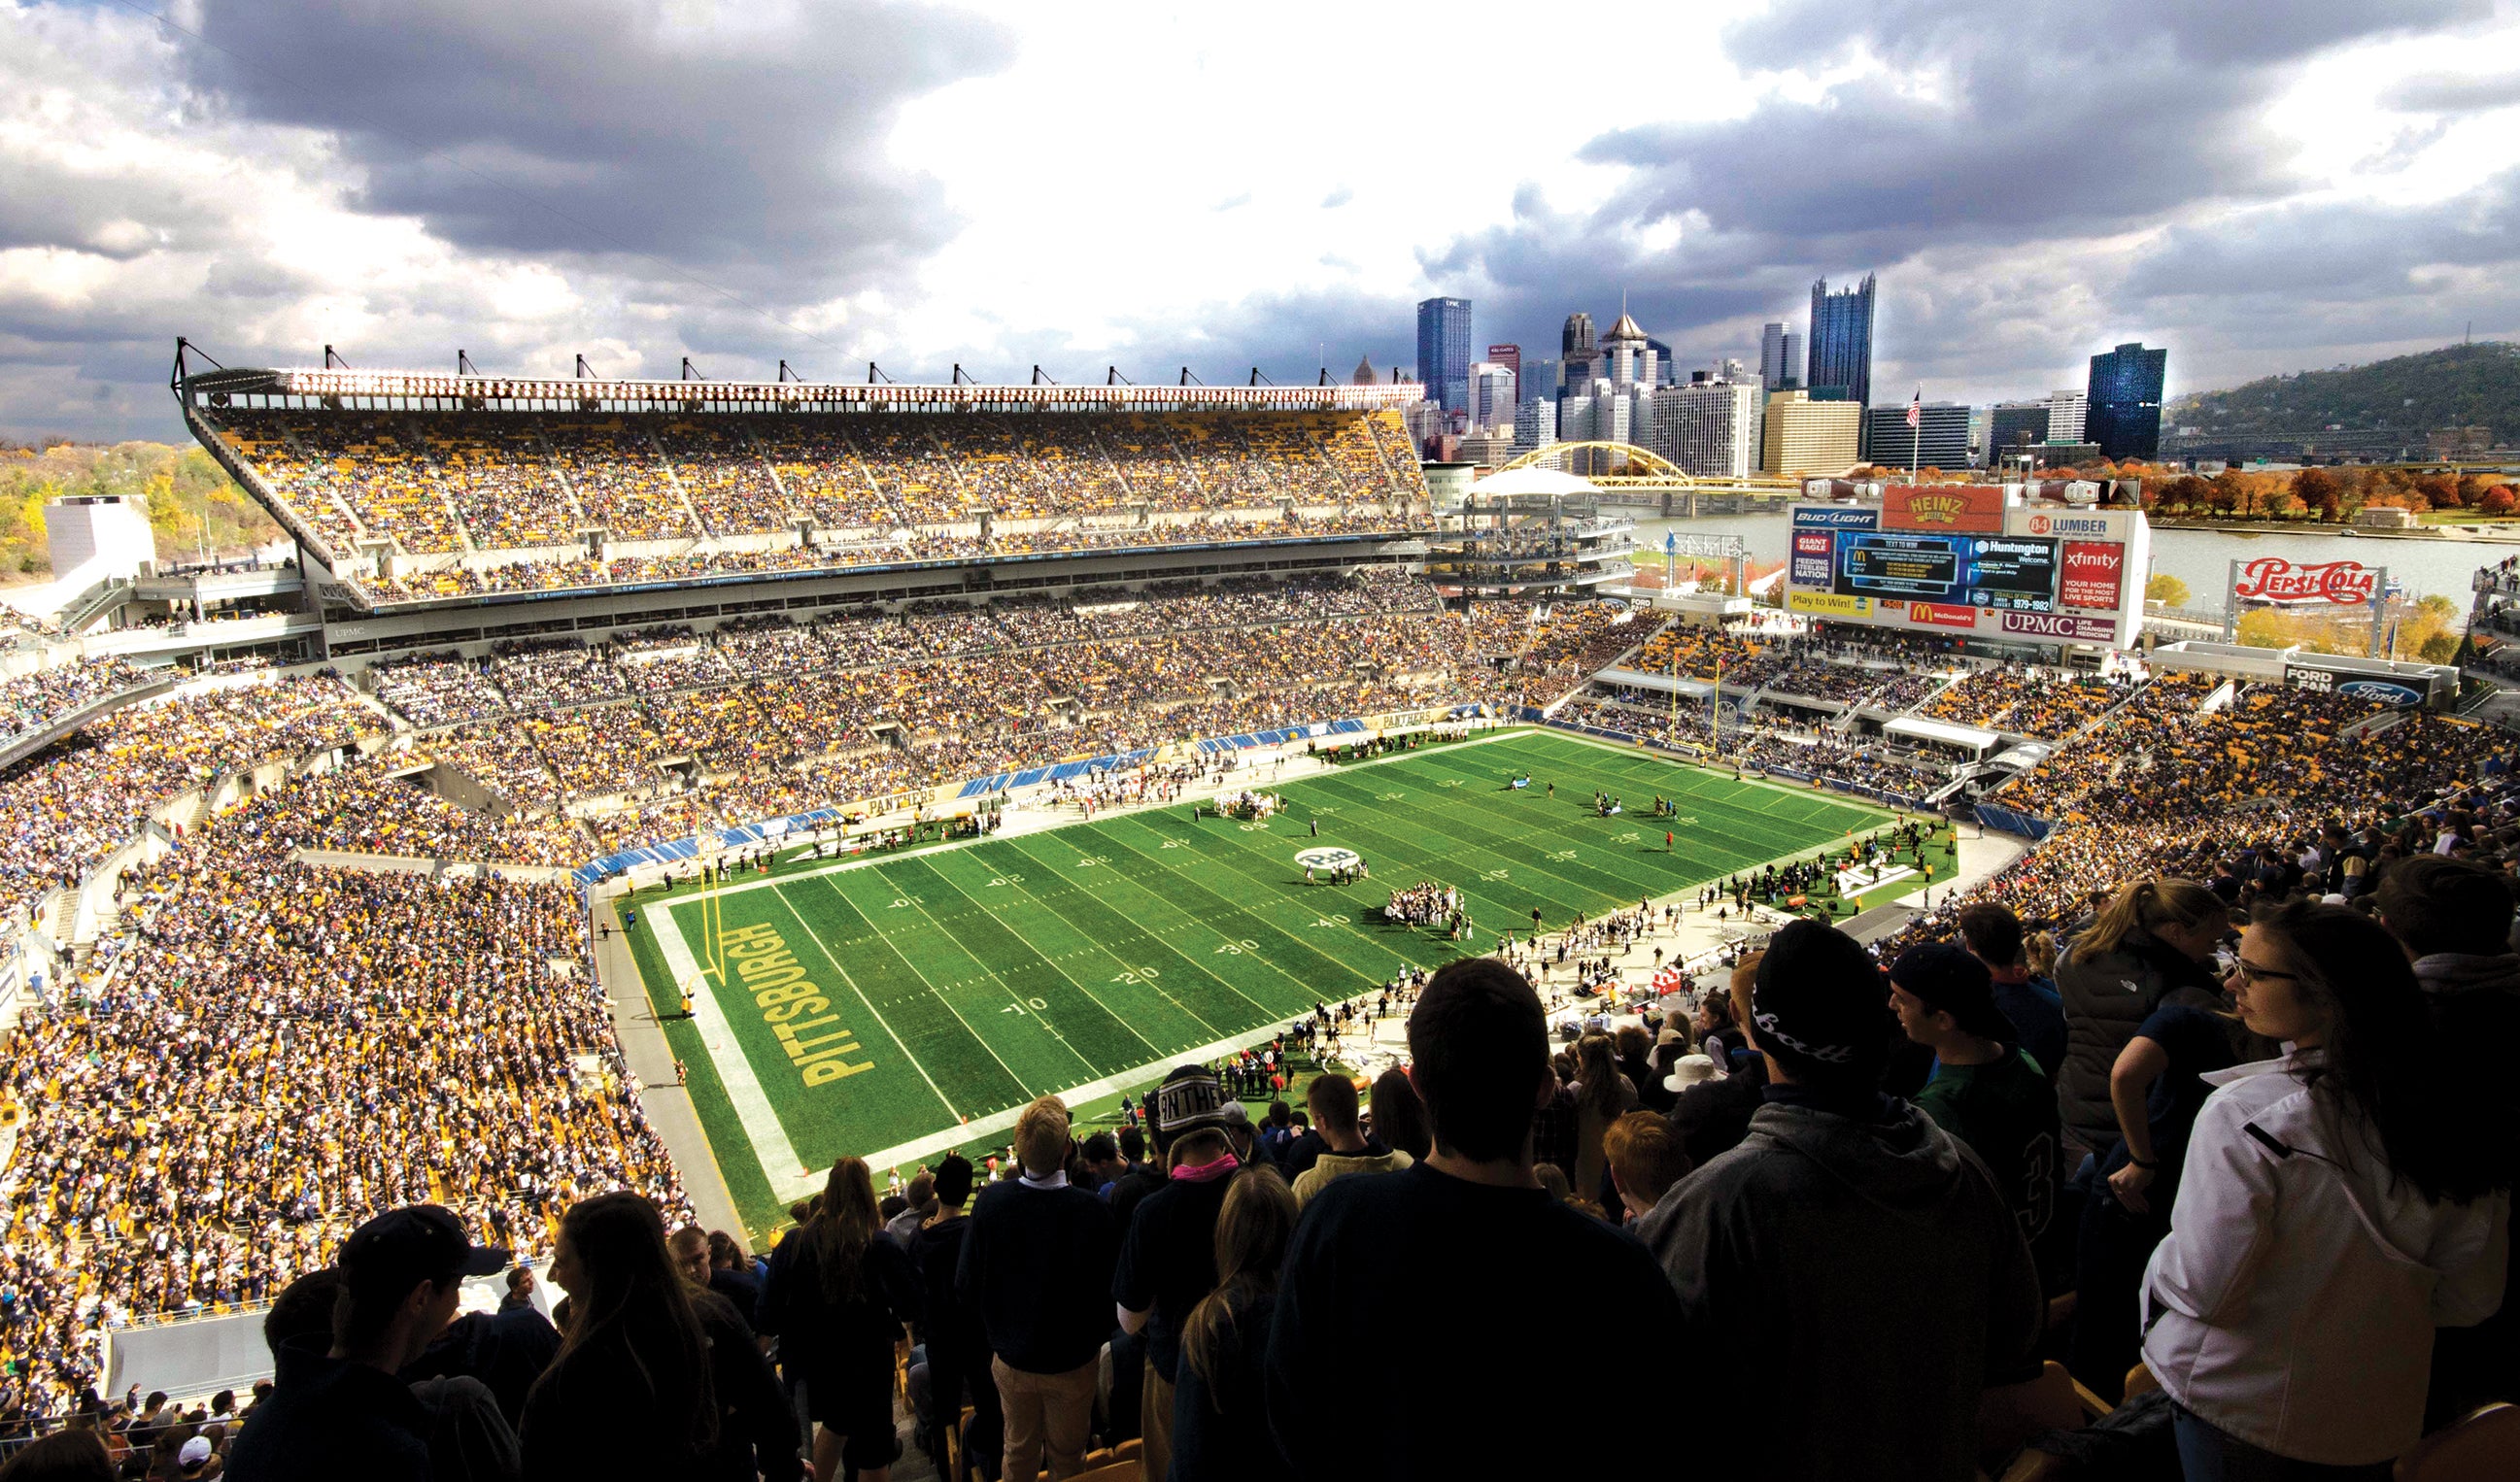 Heinz Field during a Pitt Panthers game day in the fall